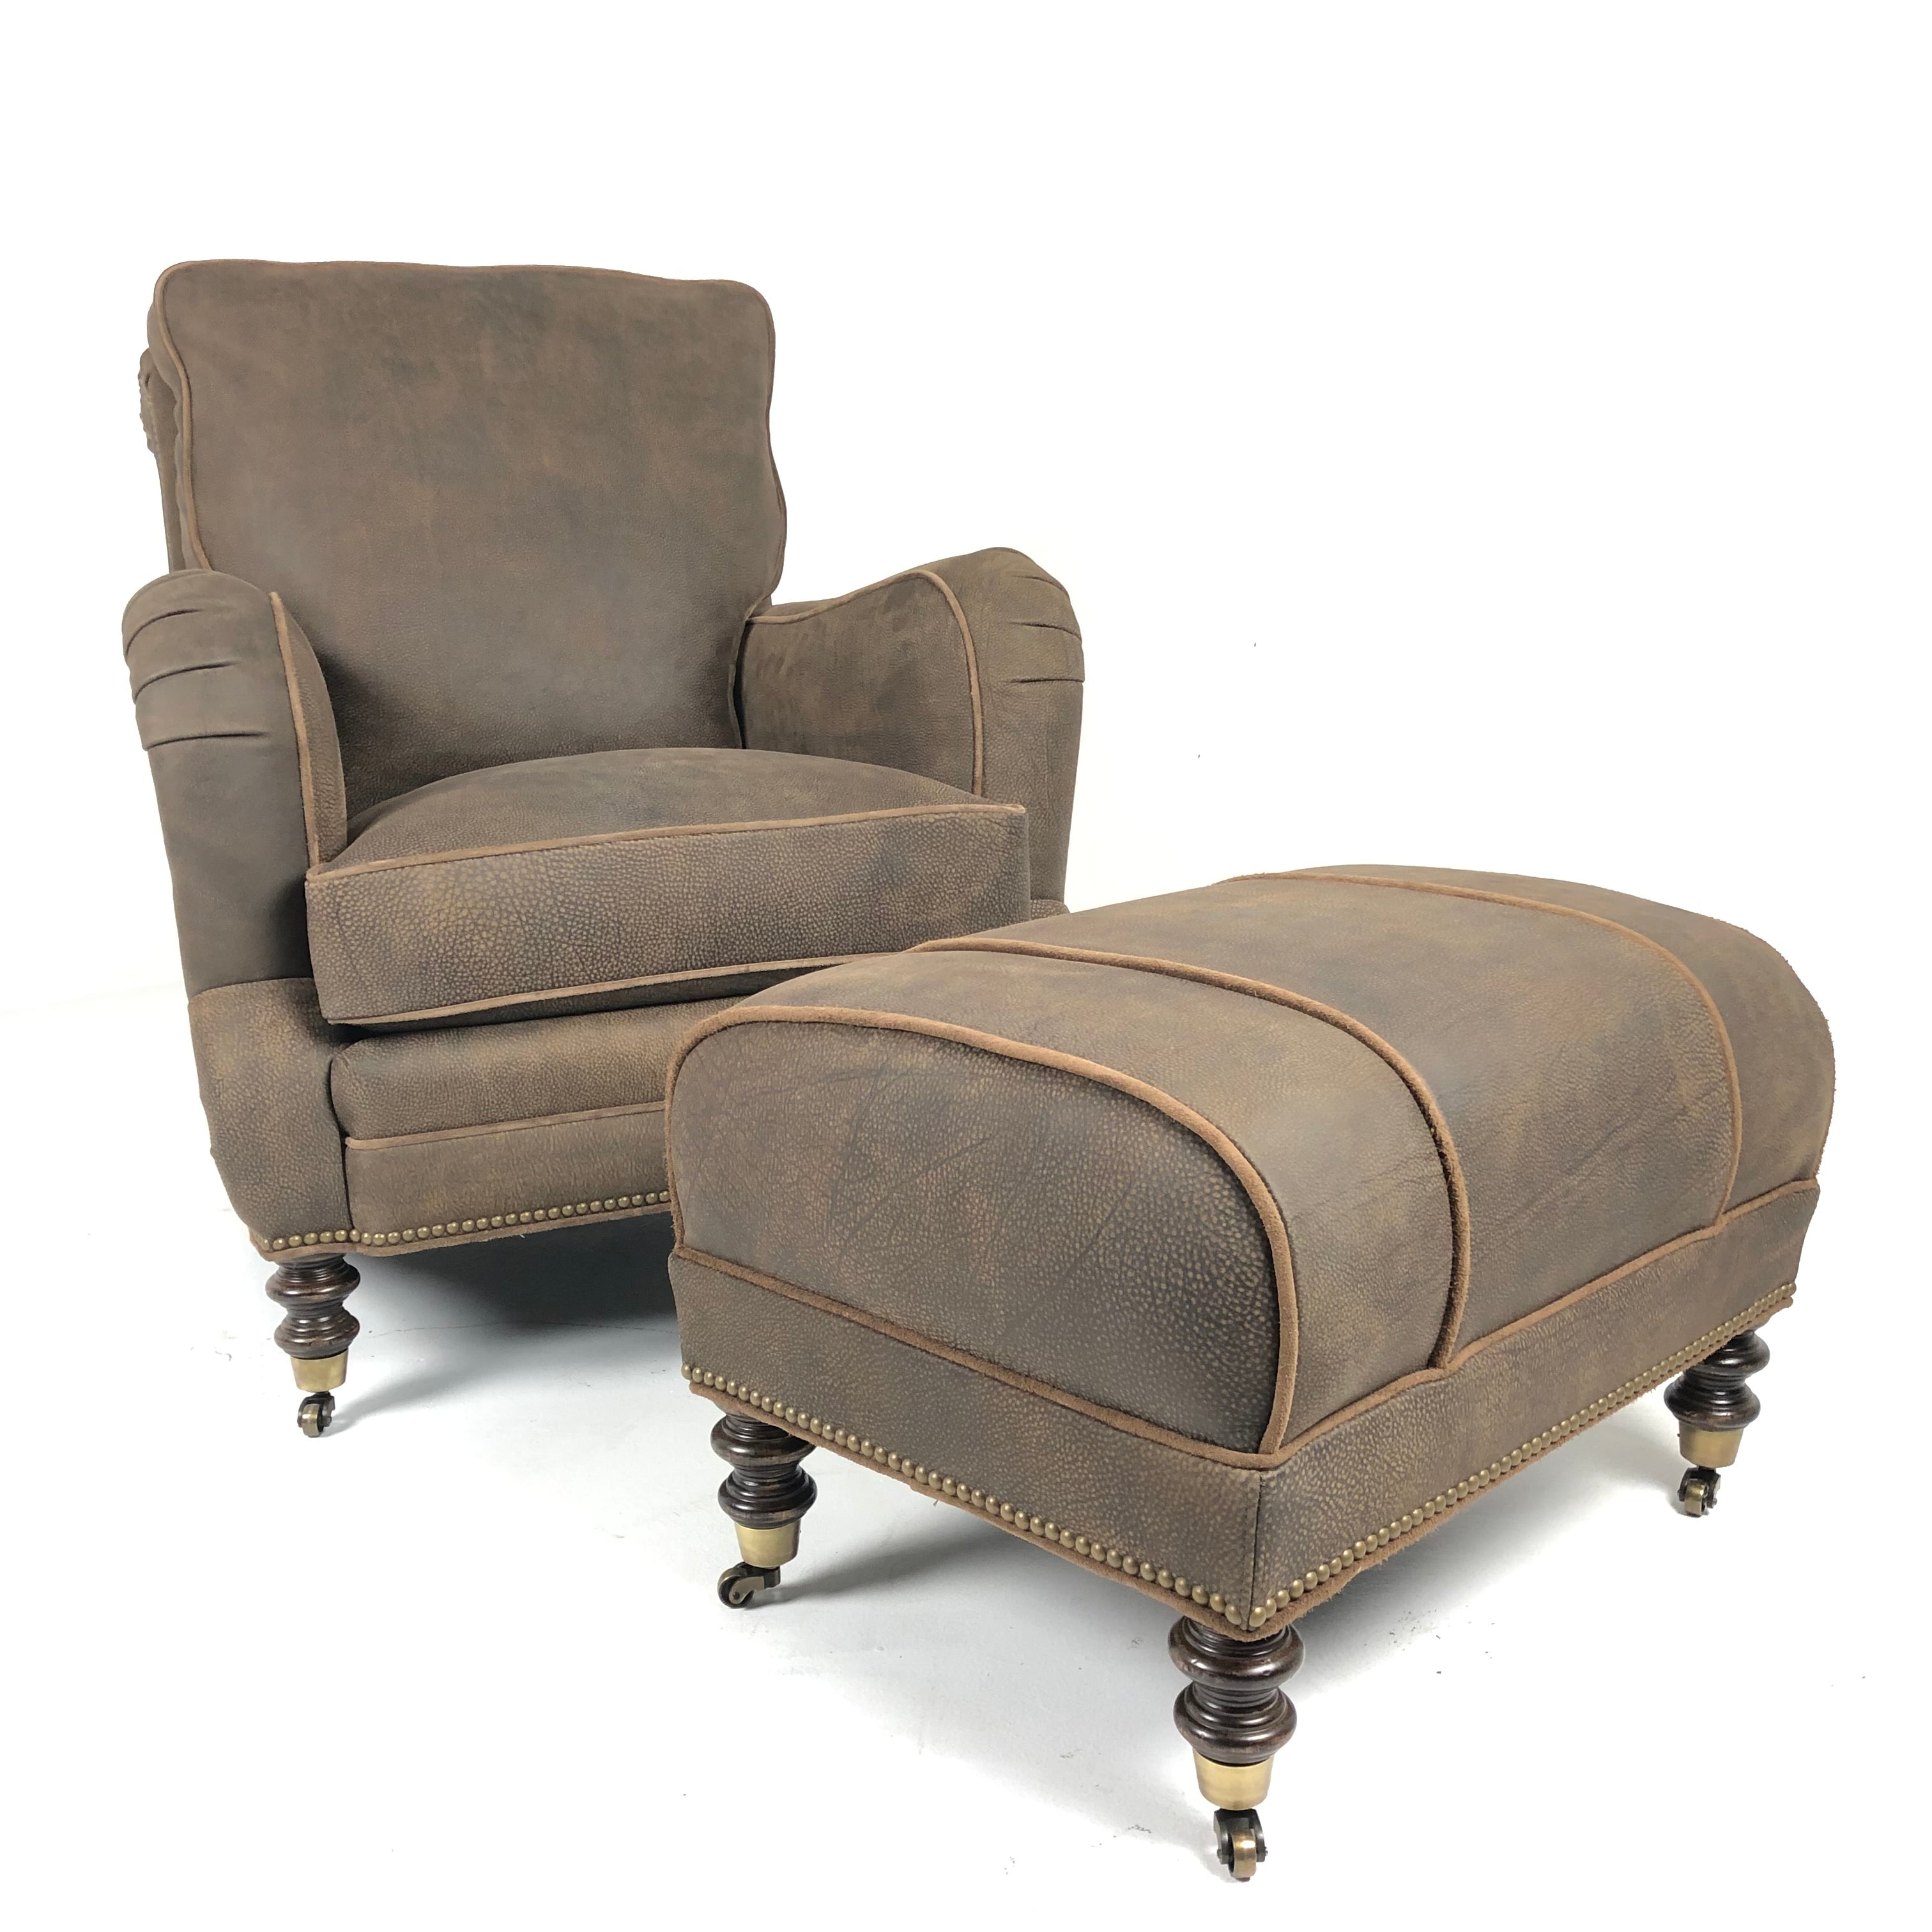 Cyrus Leather Tilt Back Chair & Ottoman by Wesley Hall shown in Zulu Chocolate leather - front view